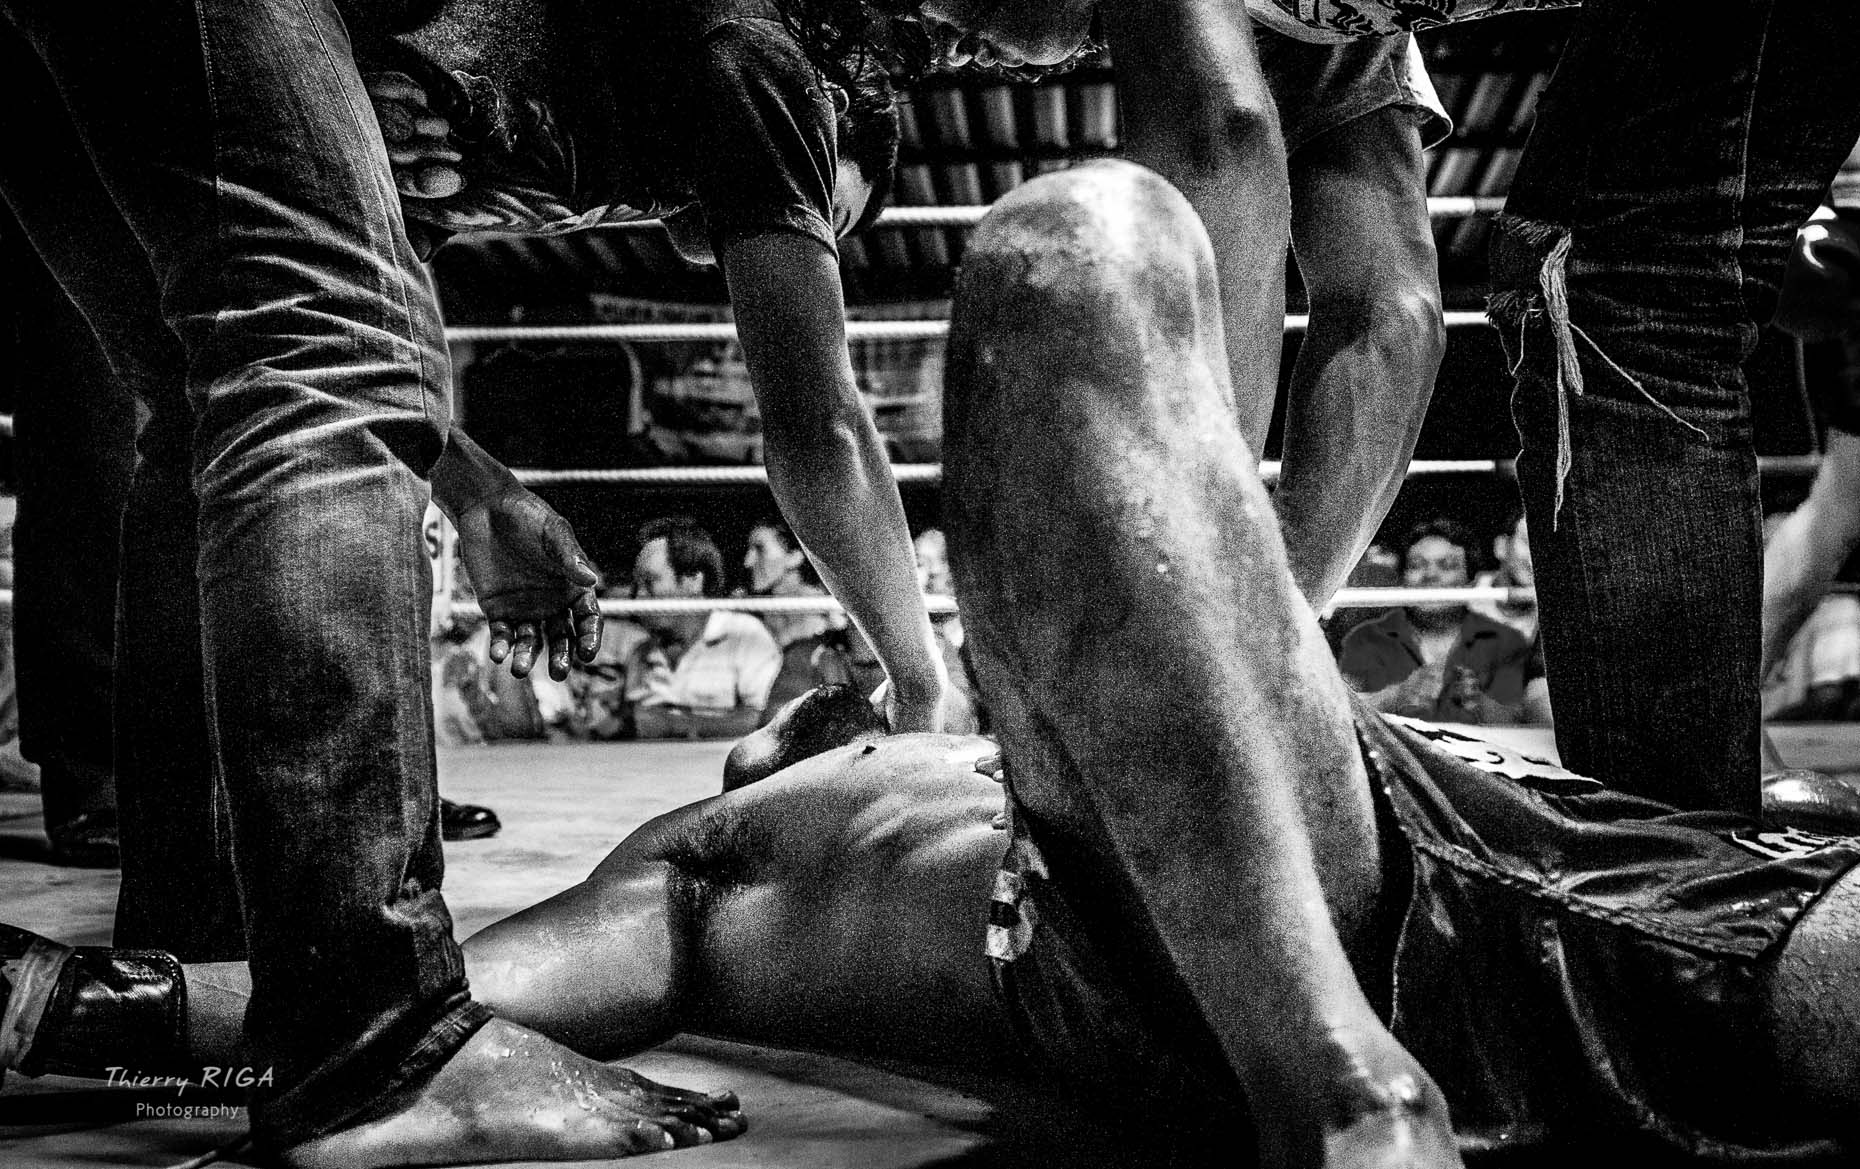 Boxer lying down after KO, Muay Thai boxing, Thailand